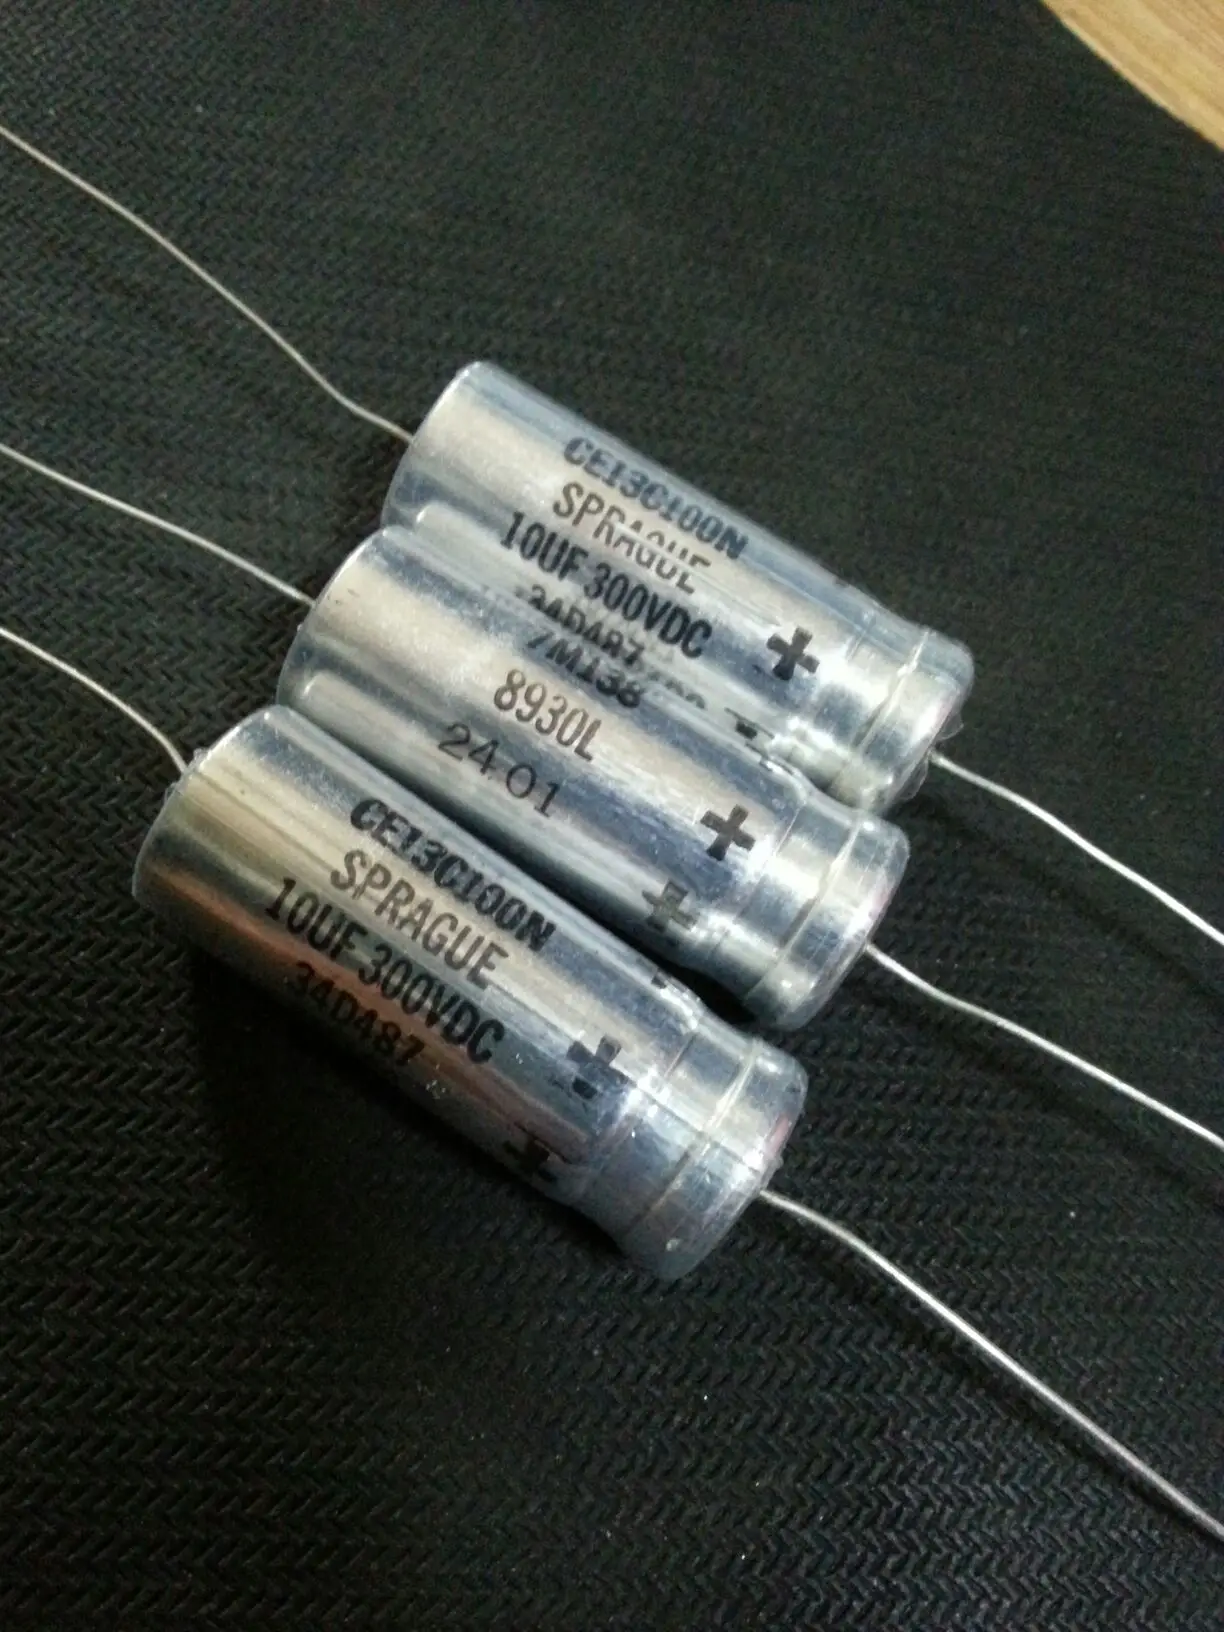 10pcs/30pcs American antique electrolytic capacitor SPRAGUE 10UF 300V 34D full copper foot free shipping 10pcs 30pcs 300v10uf 10uf 300v sprague 500d axial tube electrolytic capacitor with atom free shipping